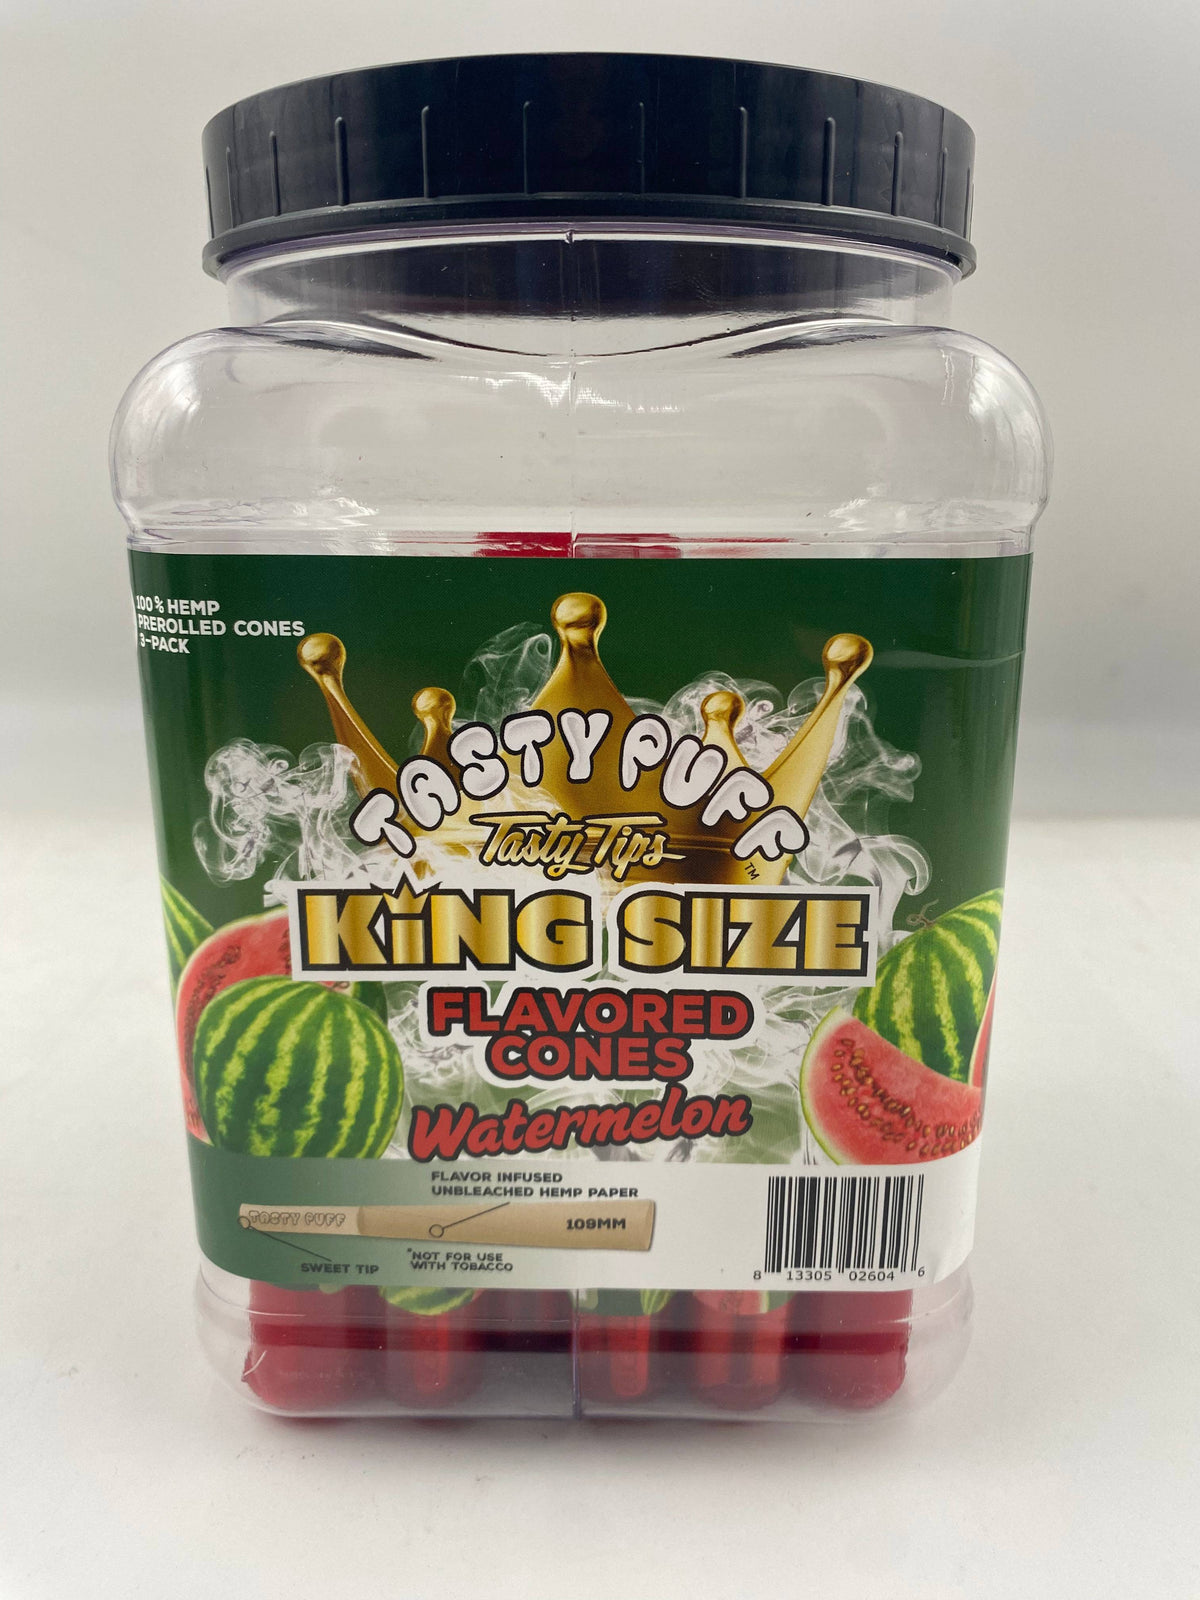 TASTY TASTY TIPS WATERMELON KING SIZE FLAVORED CONES 30 CT JAR 3 CONES PER PACK